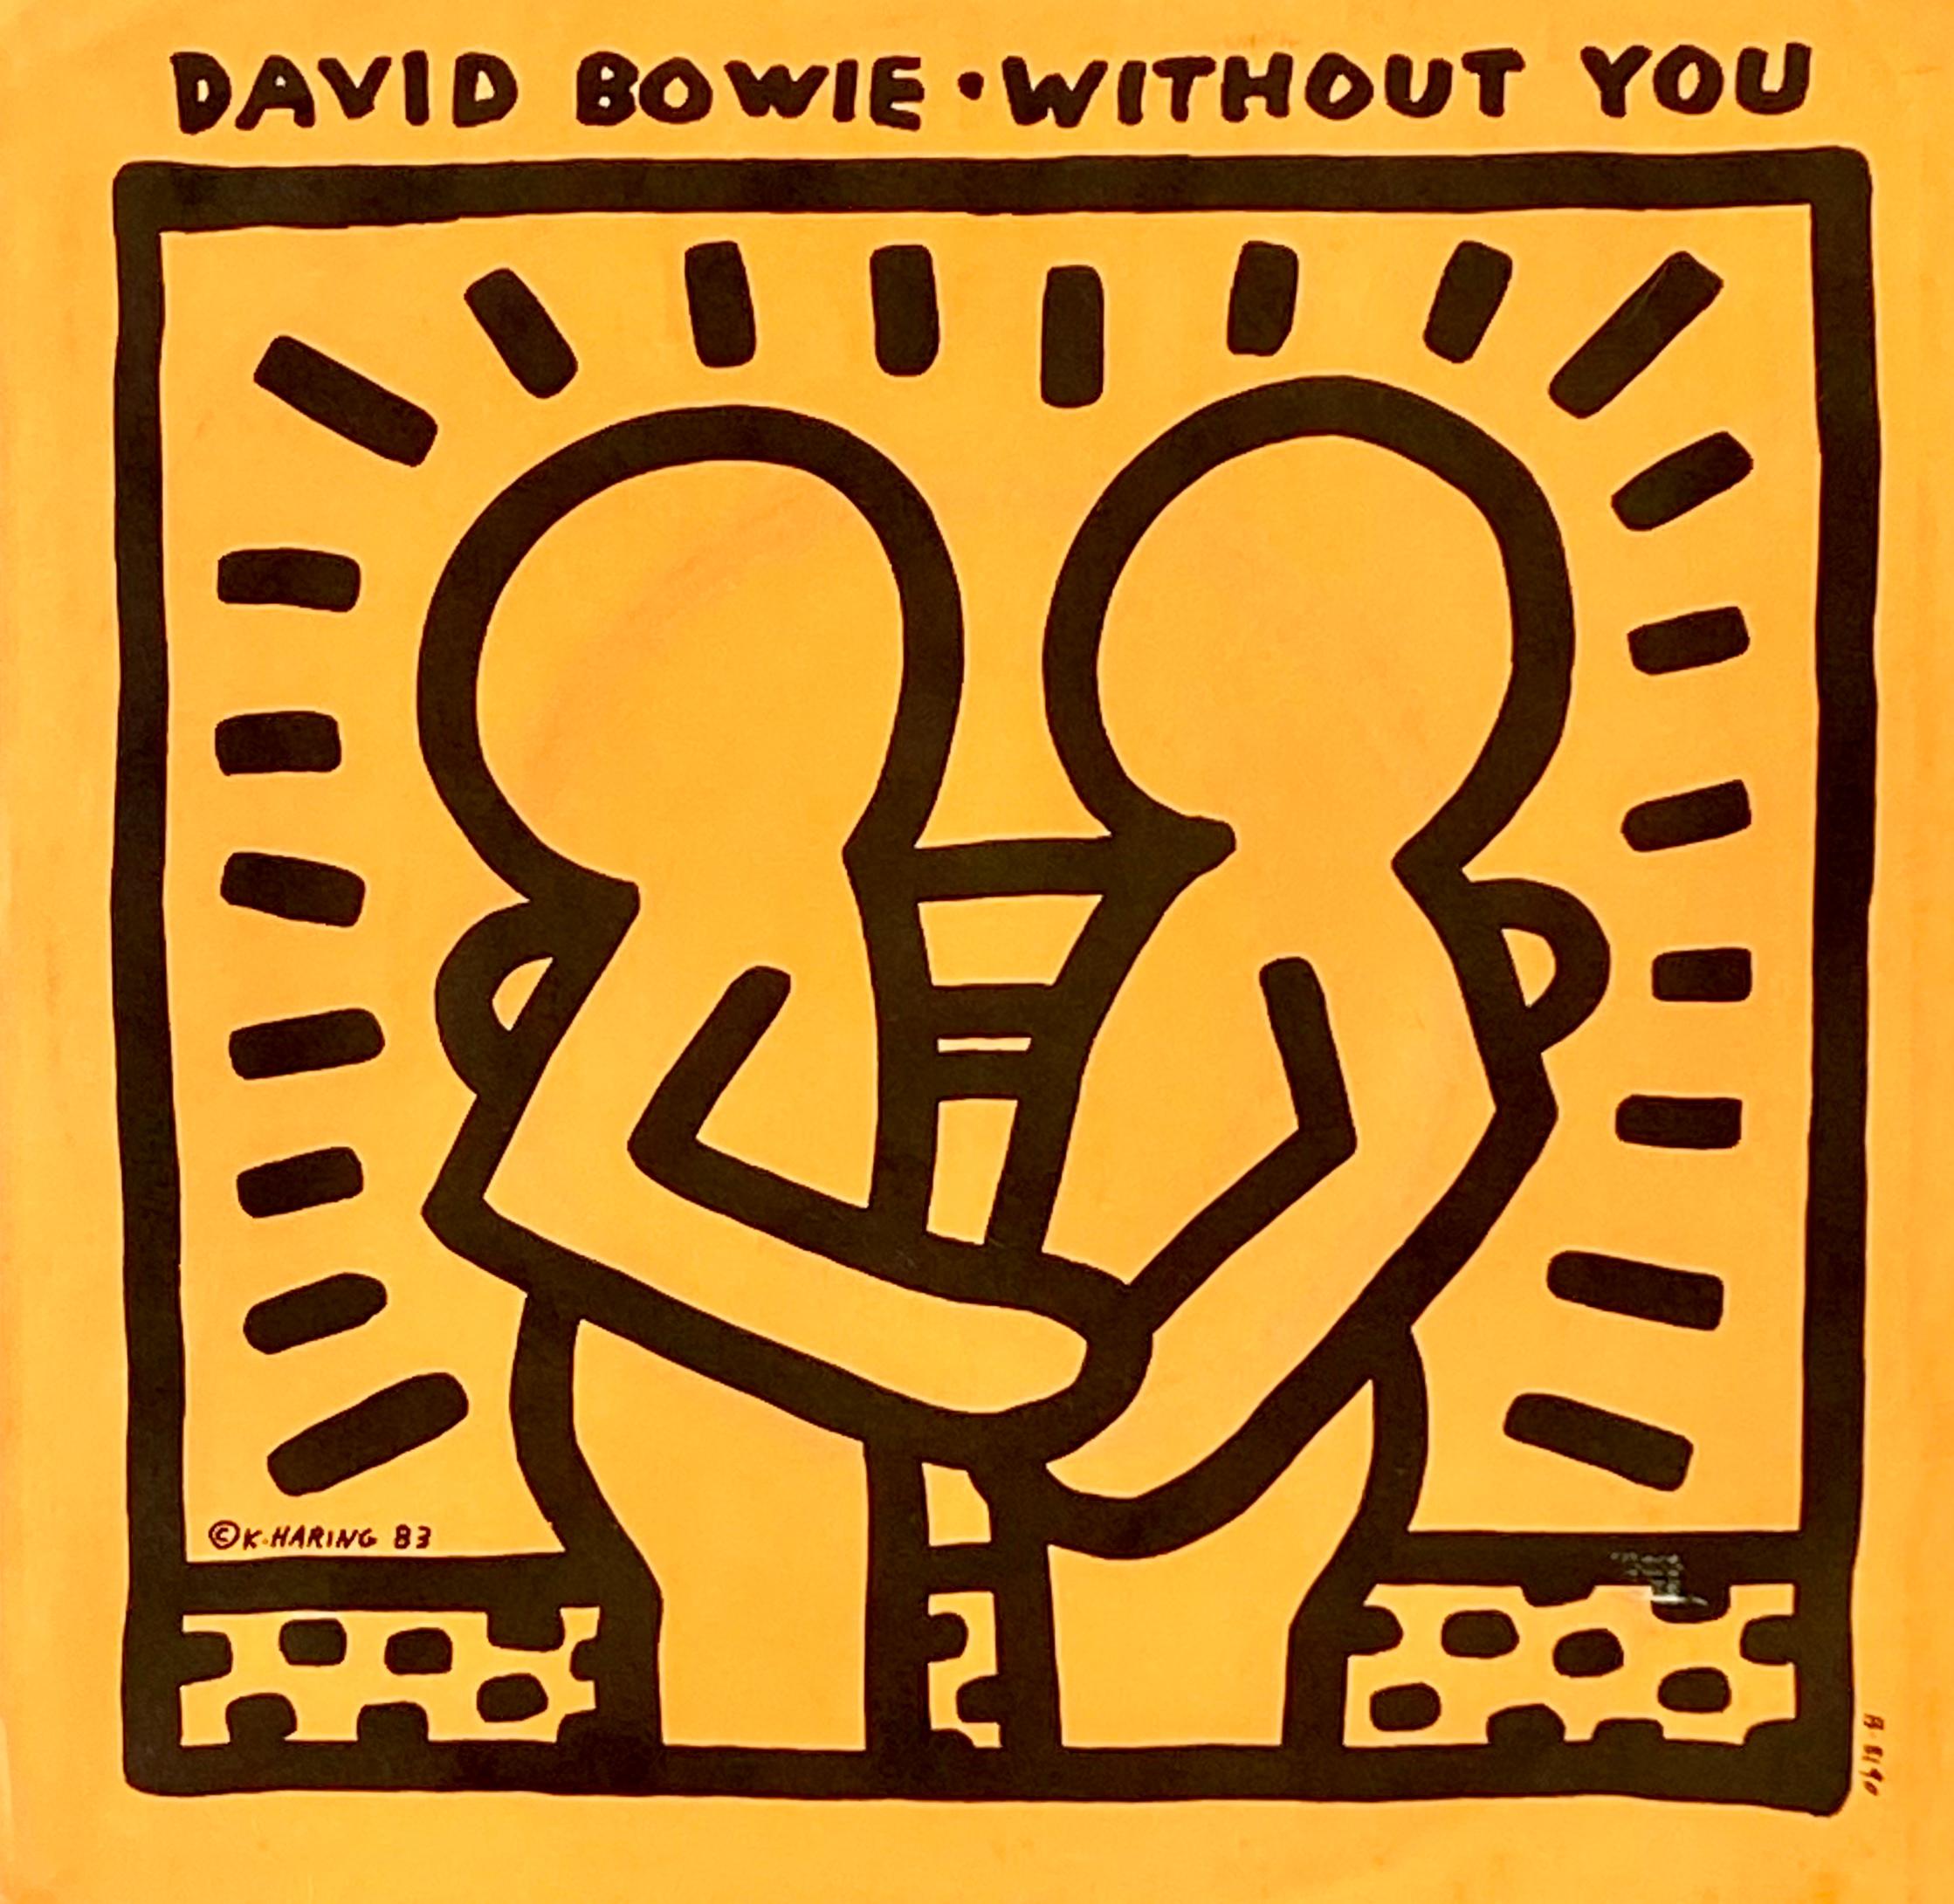 David BOWIE "Without You" A Rare Highly Sought After Vinyl Art Cover featuring Original Artwork by Keith Haring

Year: 1983

Medium: Off-Set Lithograph

Dimensions: 7 x 7 inches

Cover: Some minor shelf wear; otherwise a fine impression in very good